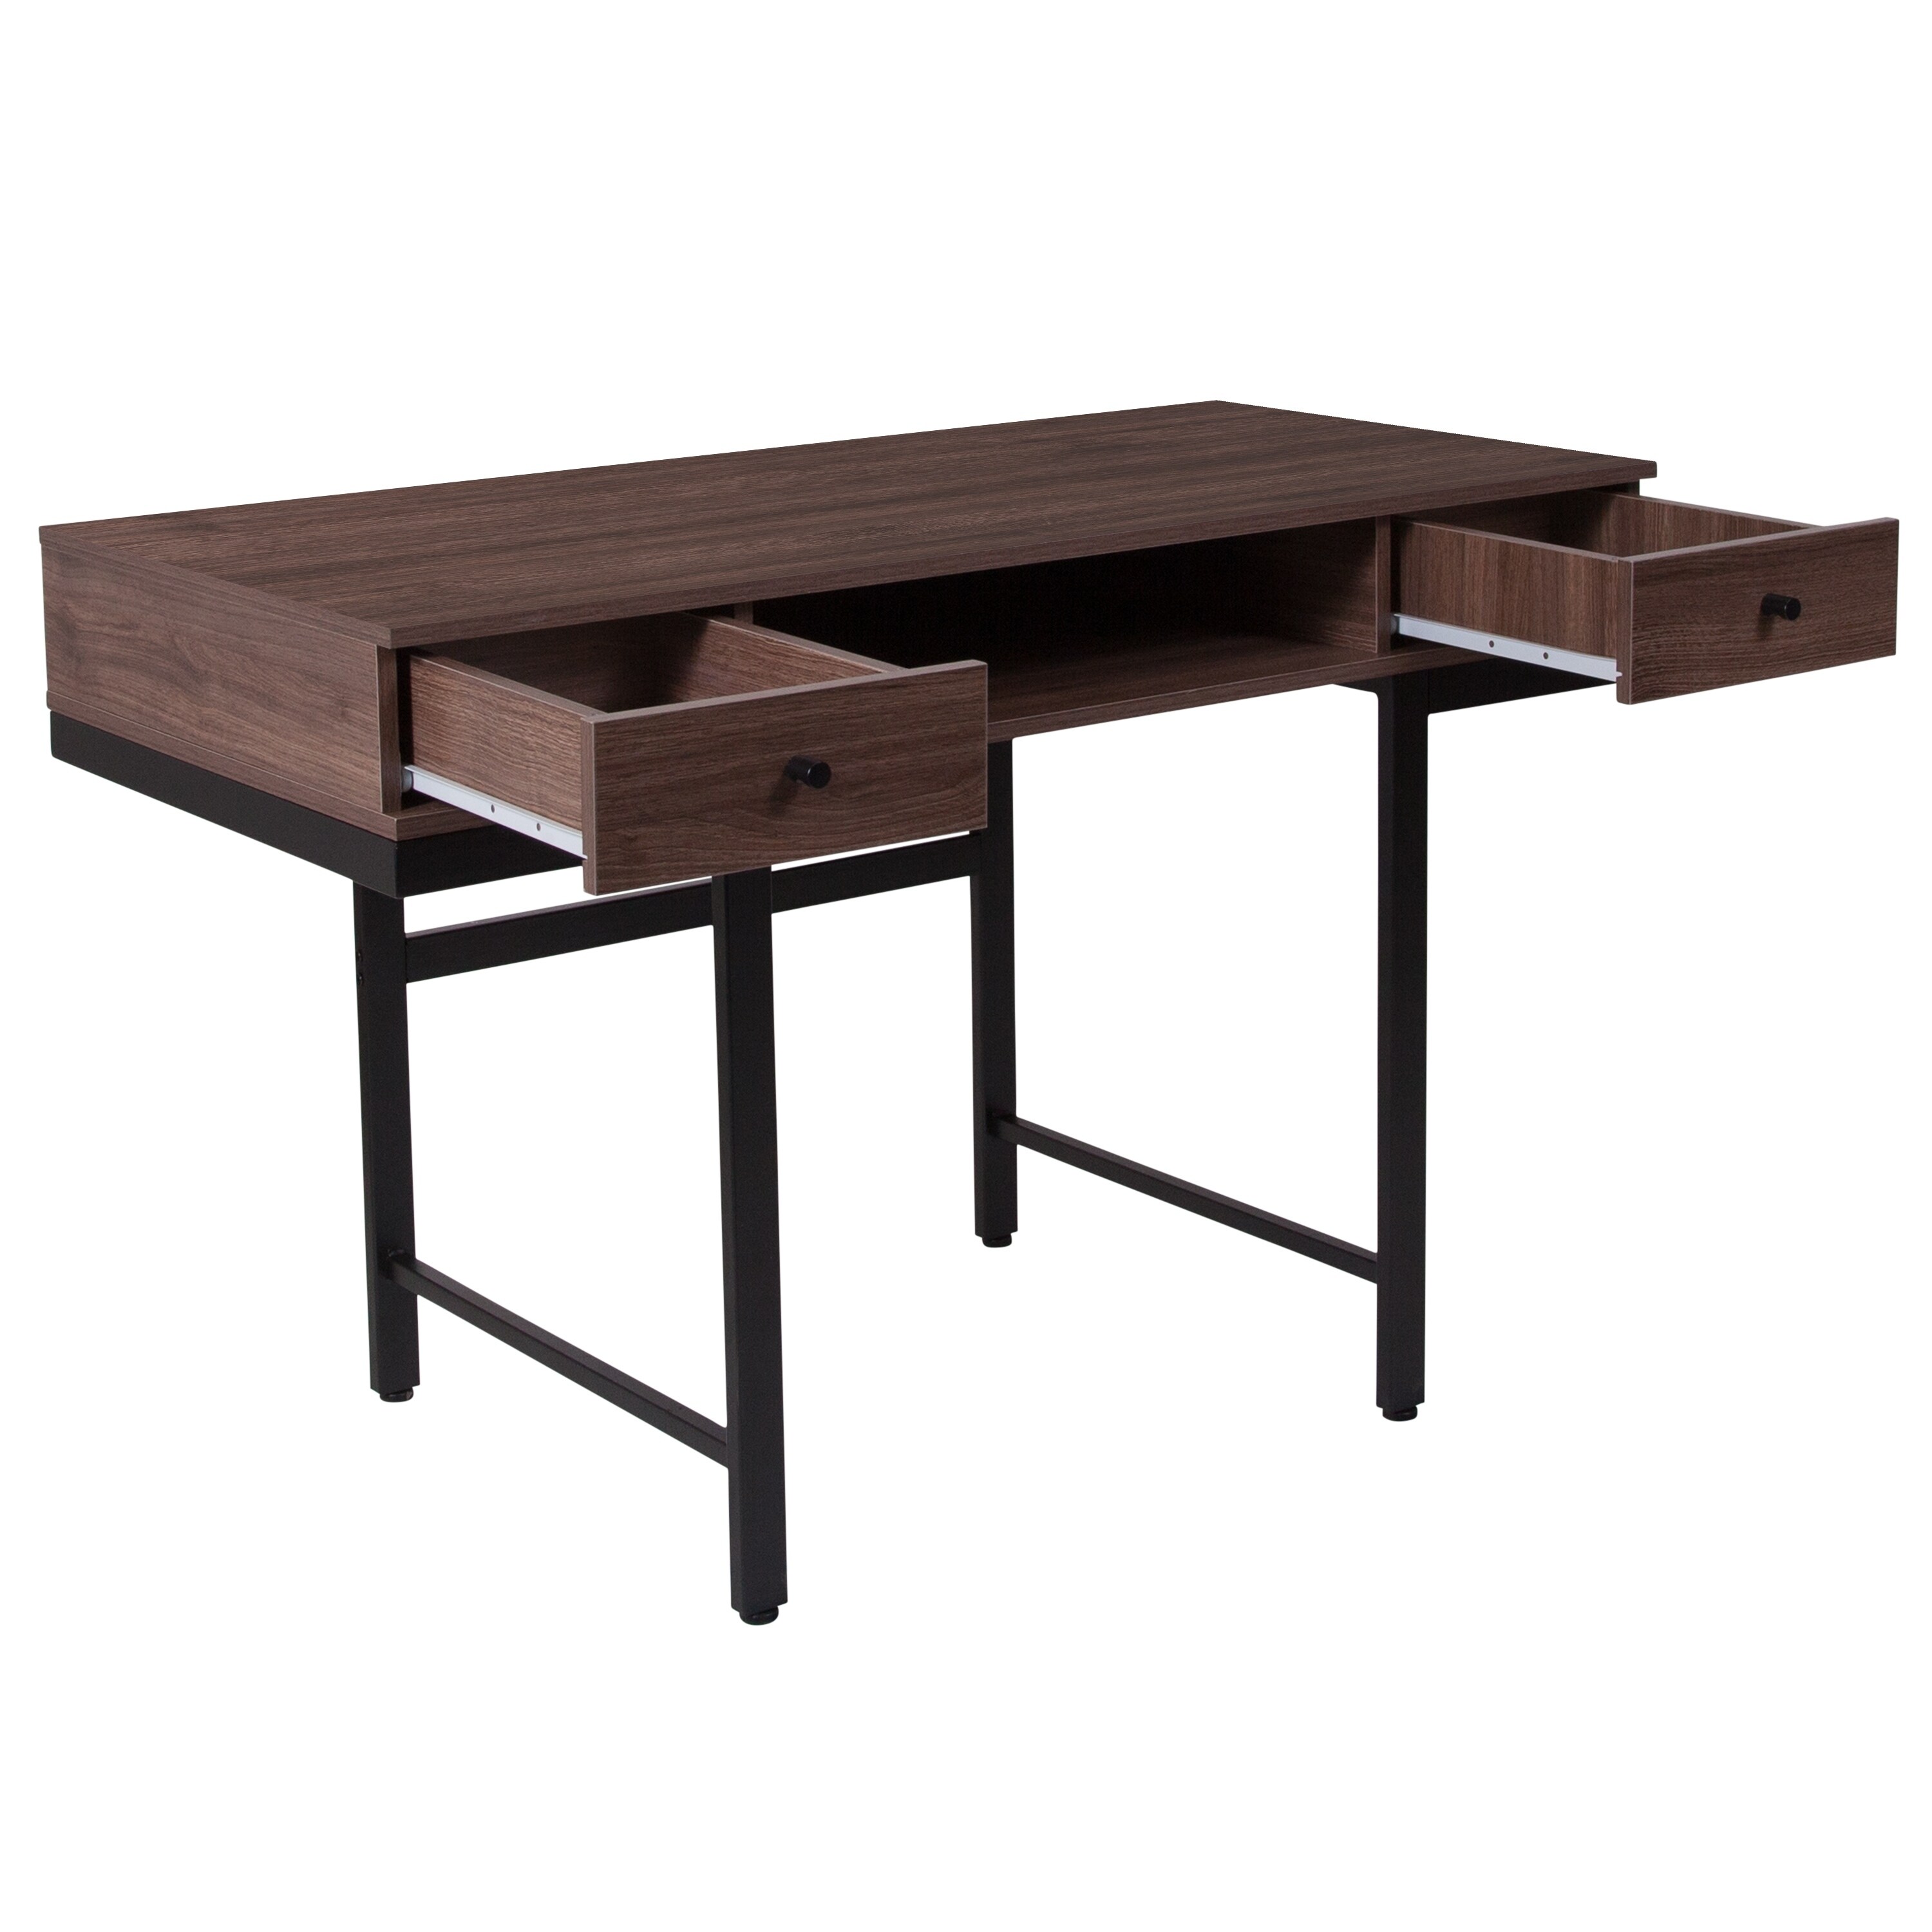 Shop Bartlett Desk With Drawers And Black Metal Legs On Sale